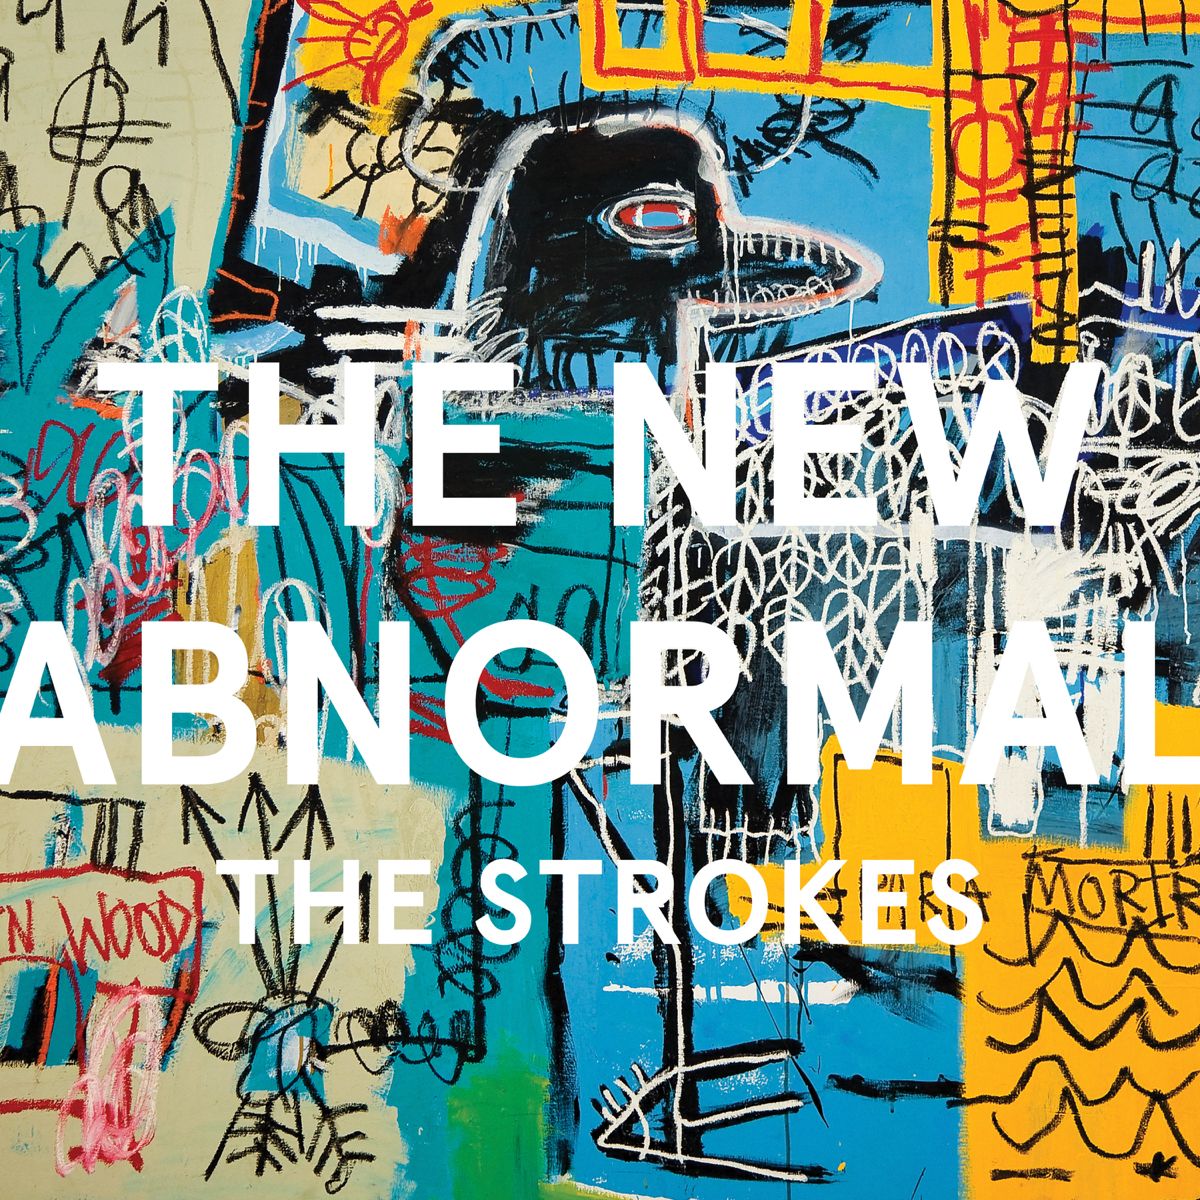 Album review: The Strokes - "The New Abnormal" | The Young Folks